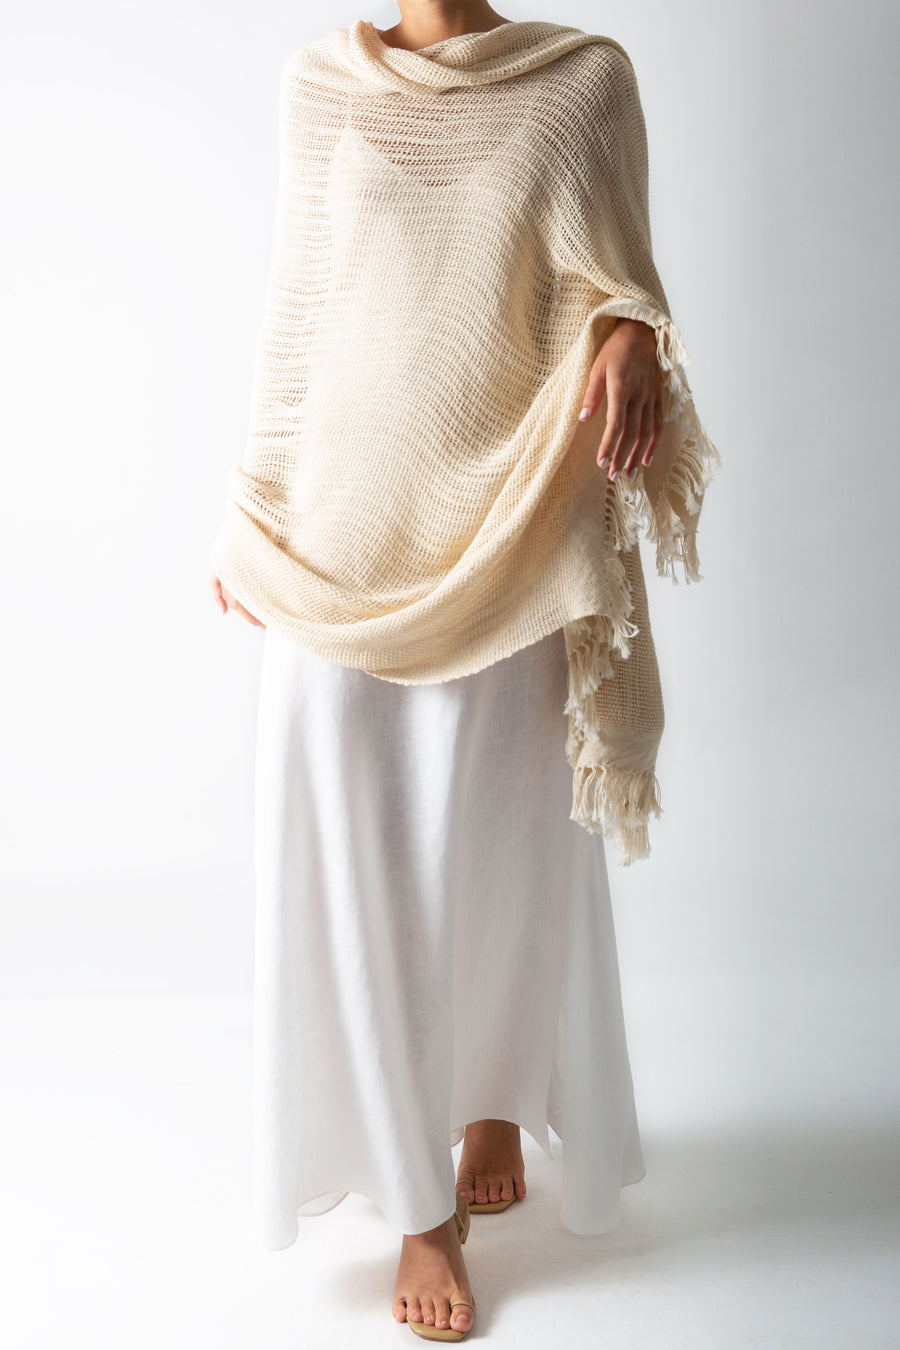 This is a photo of a woman wearing a white linen slip dress over a natural-colored shawl which is wrapped around her top half and arms.